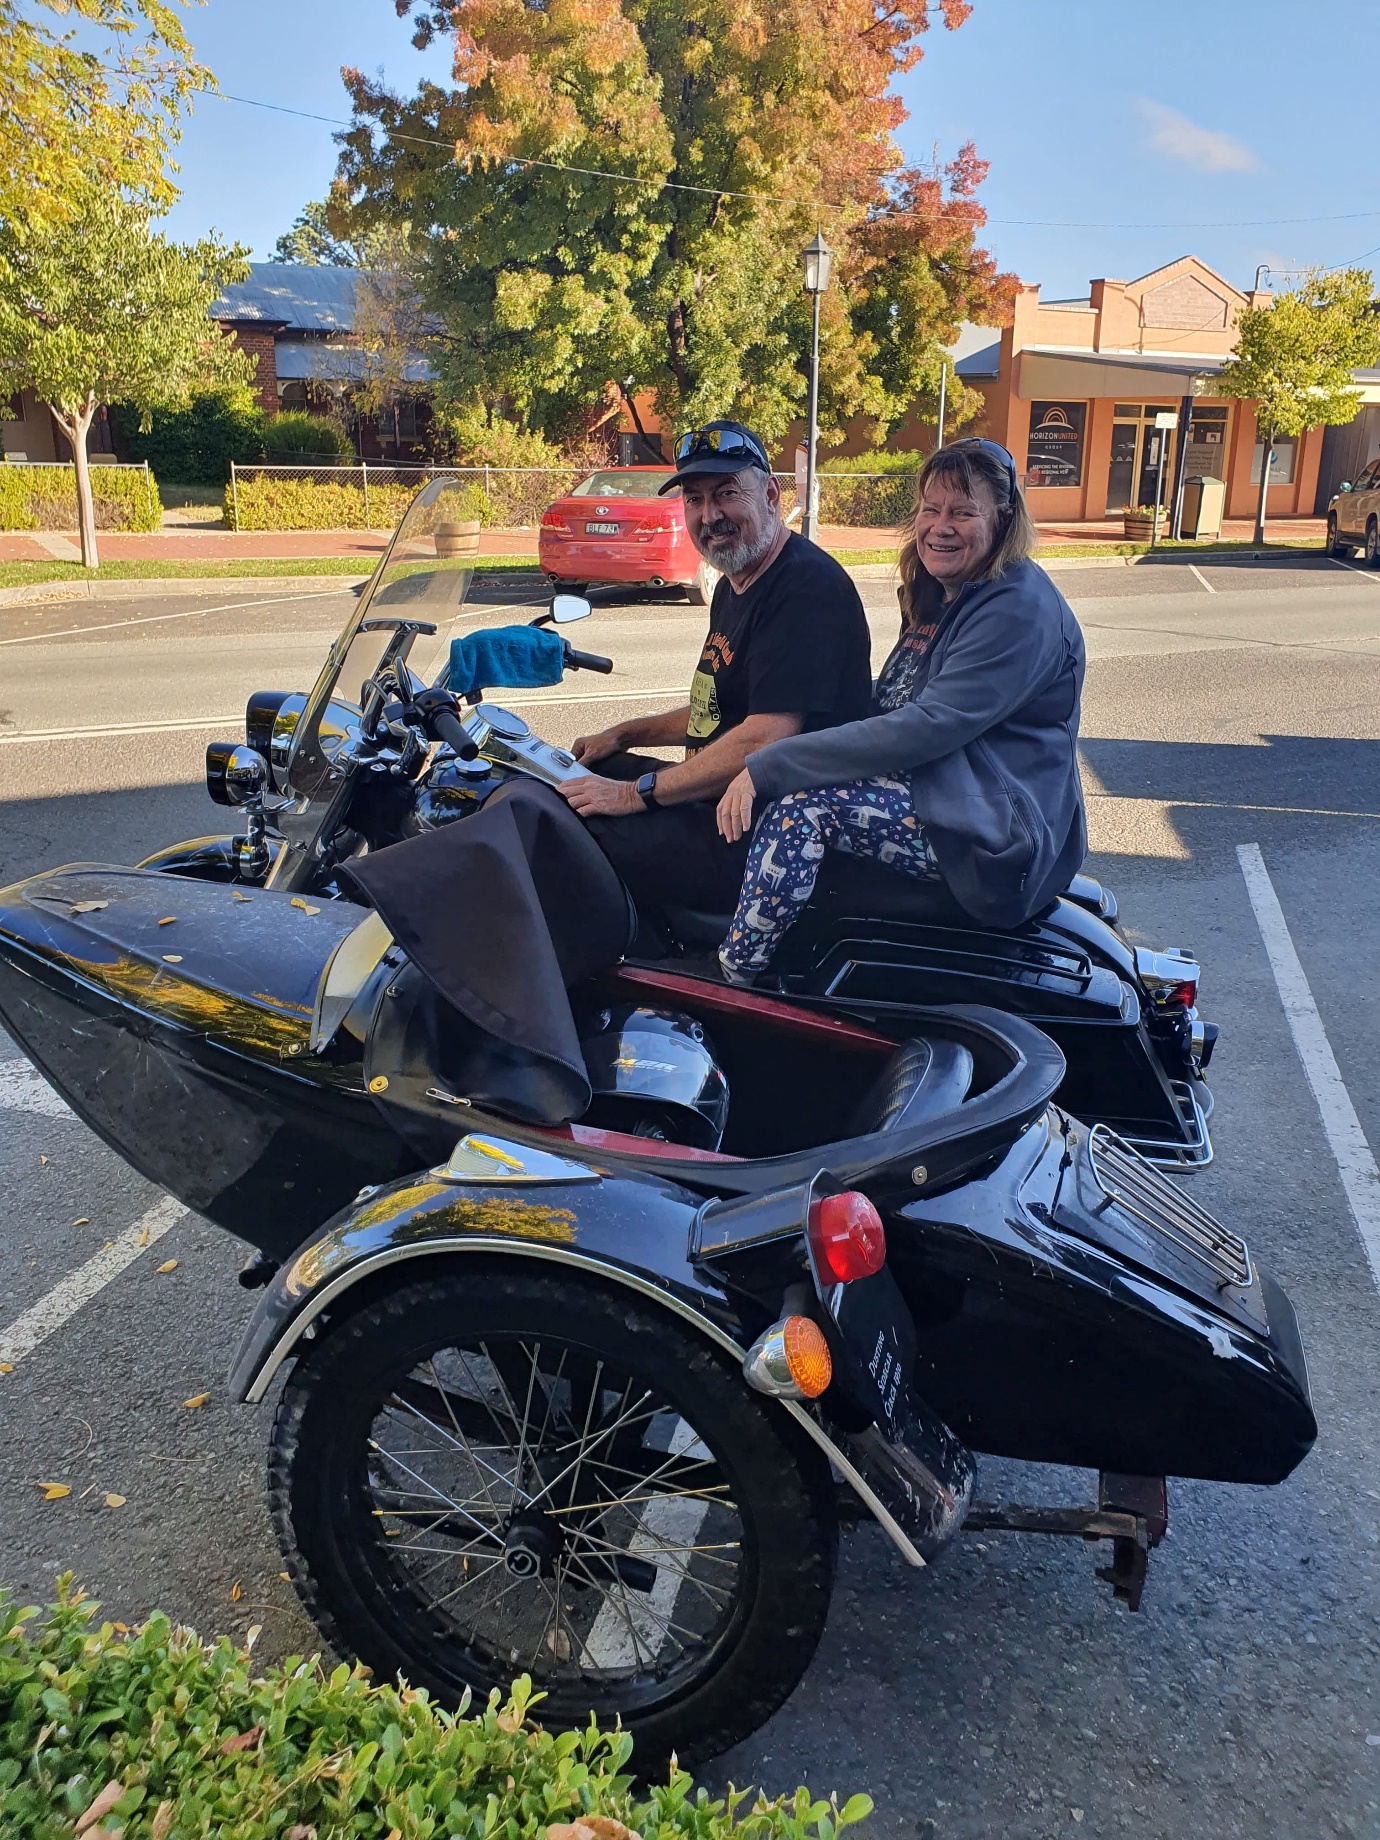 A couple sitting on a motorcycle

Description automatically generated with medium confidence